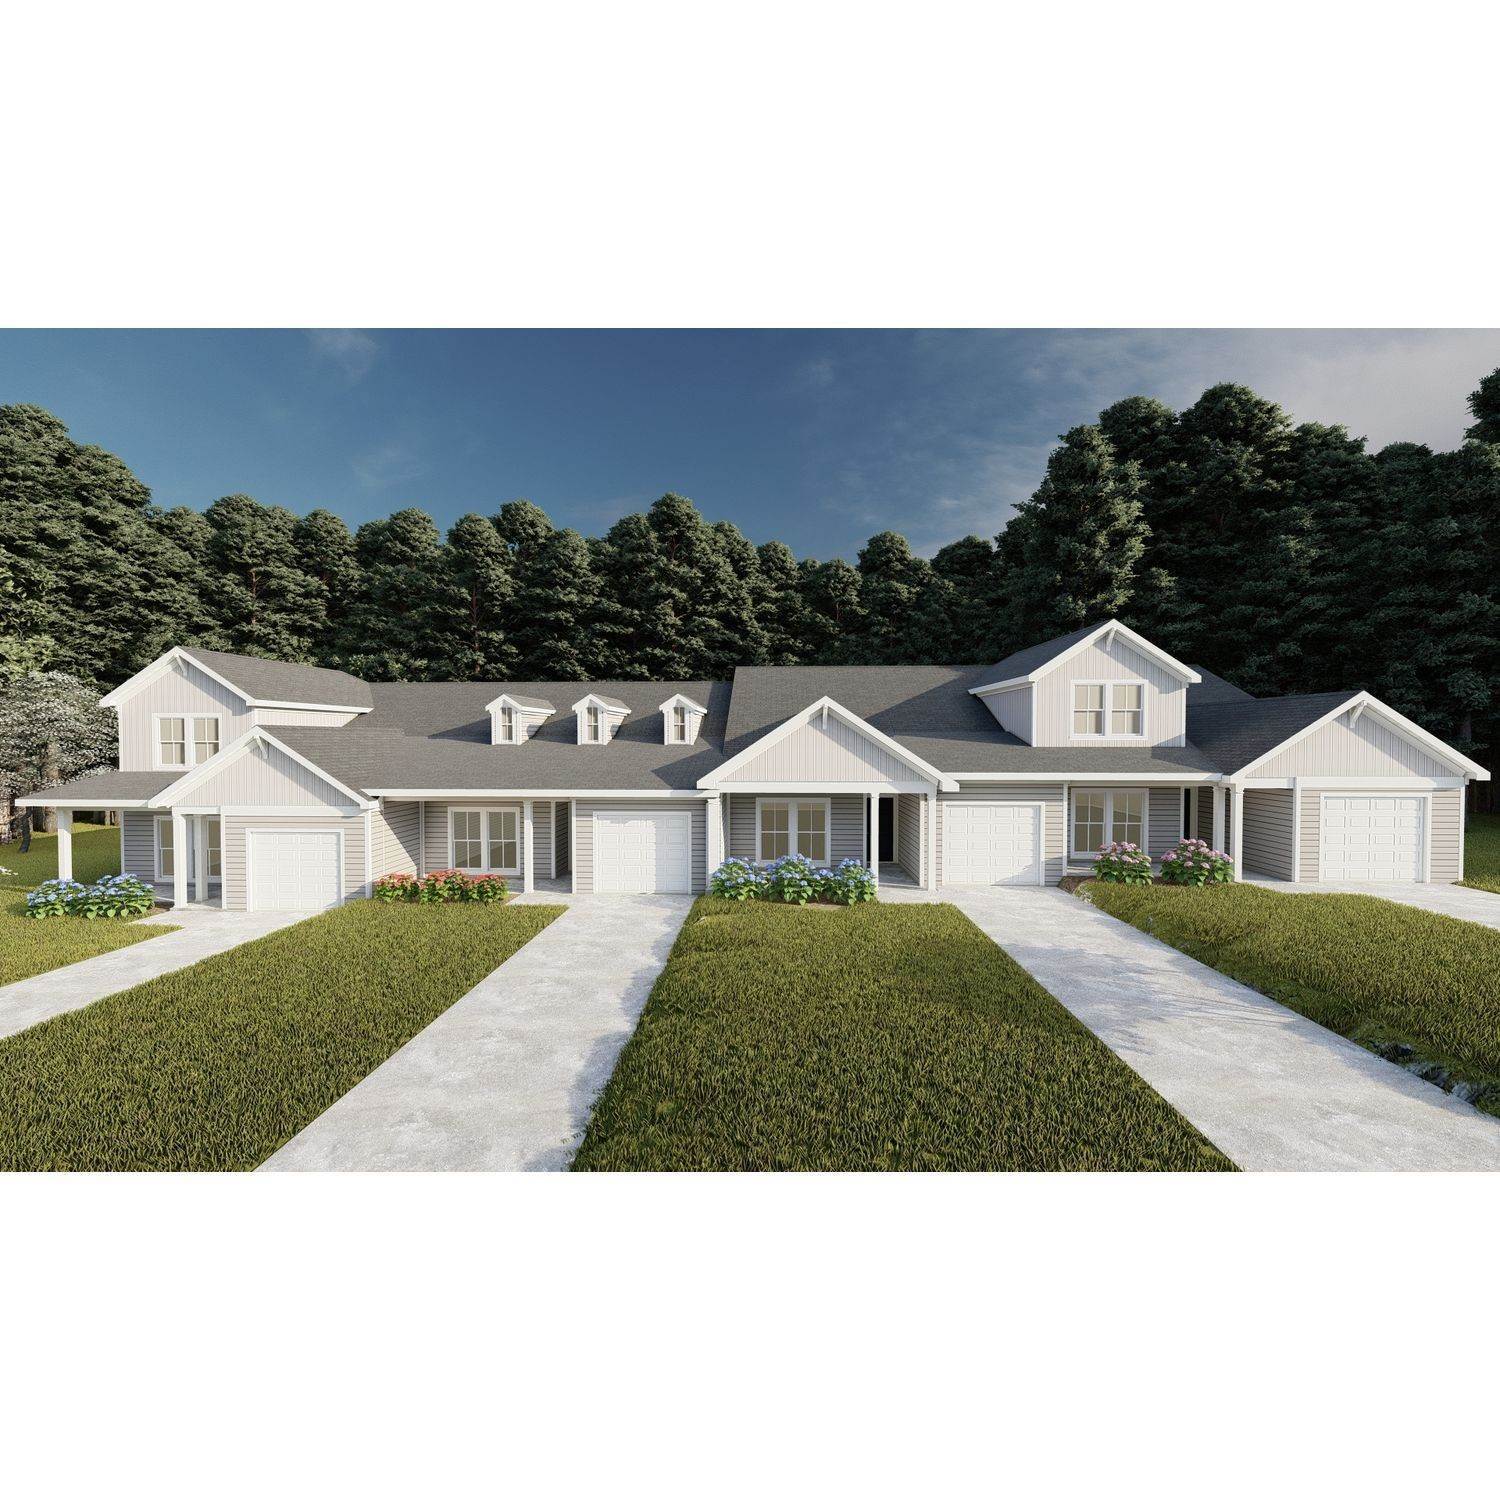 4. Windsor Townhomes building at 594 Hampton Drive, North Augusta, SC 29860